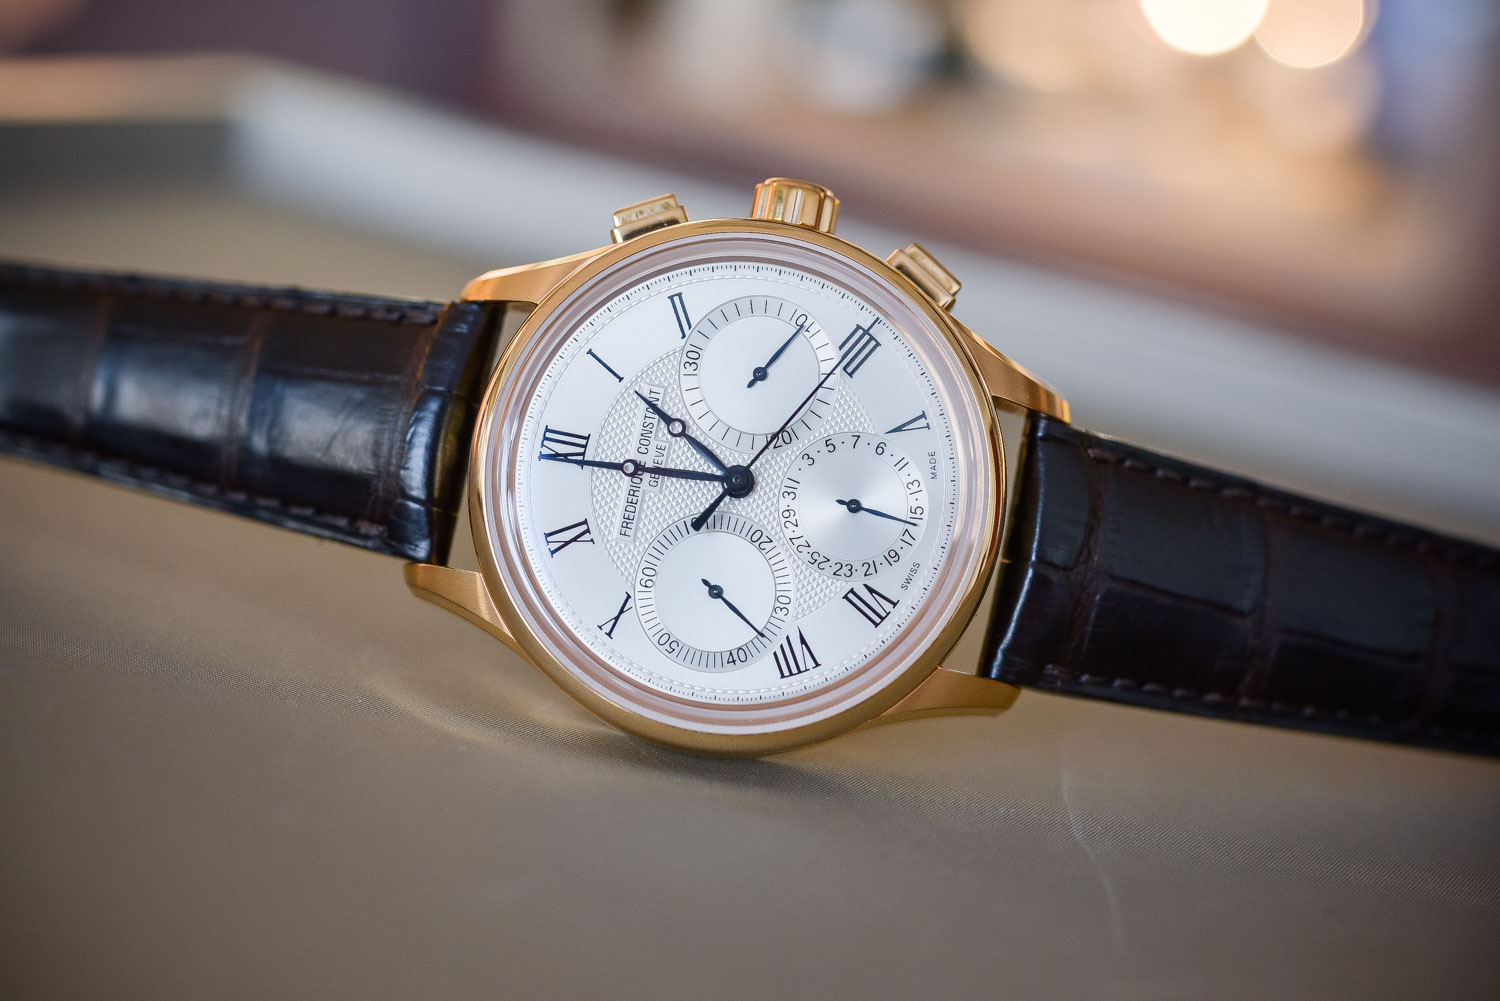 Frederique Constant Flyback Chronograph Manufacture - Baselworld 2017